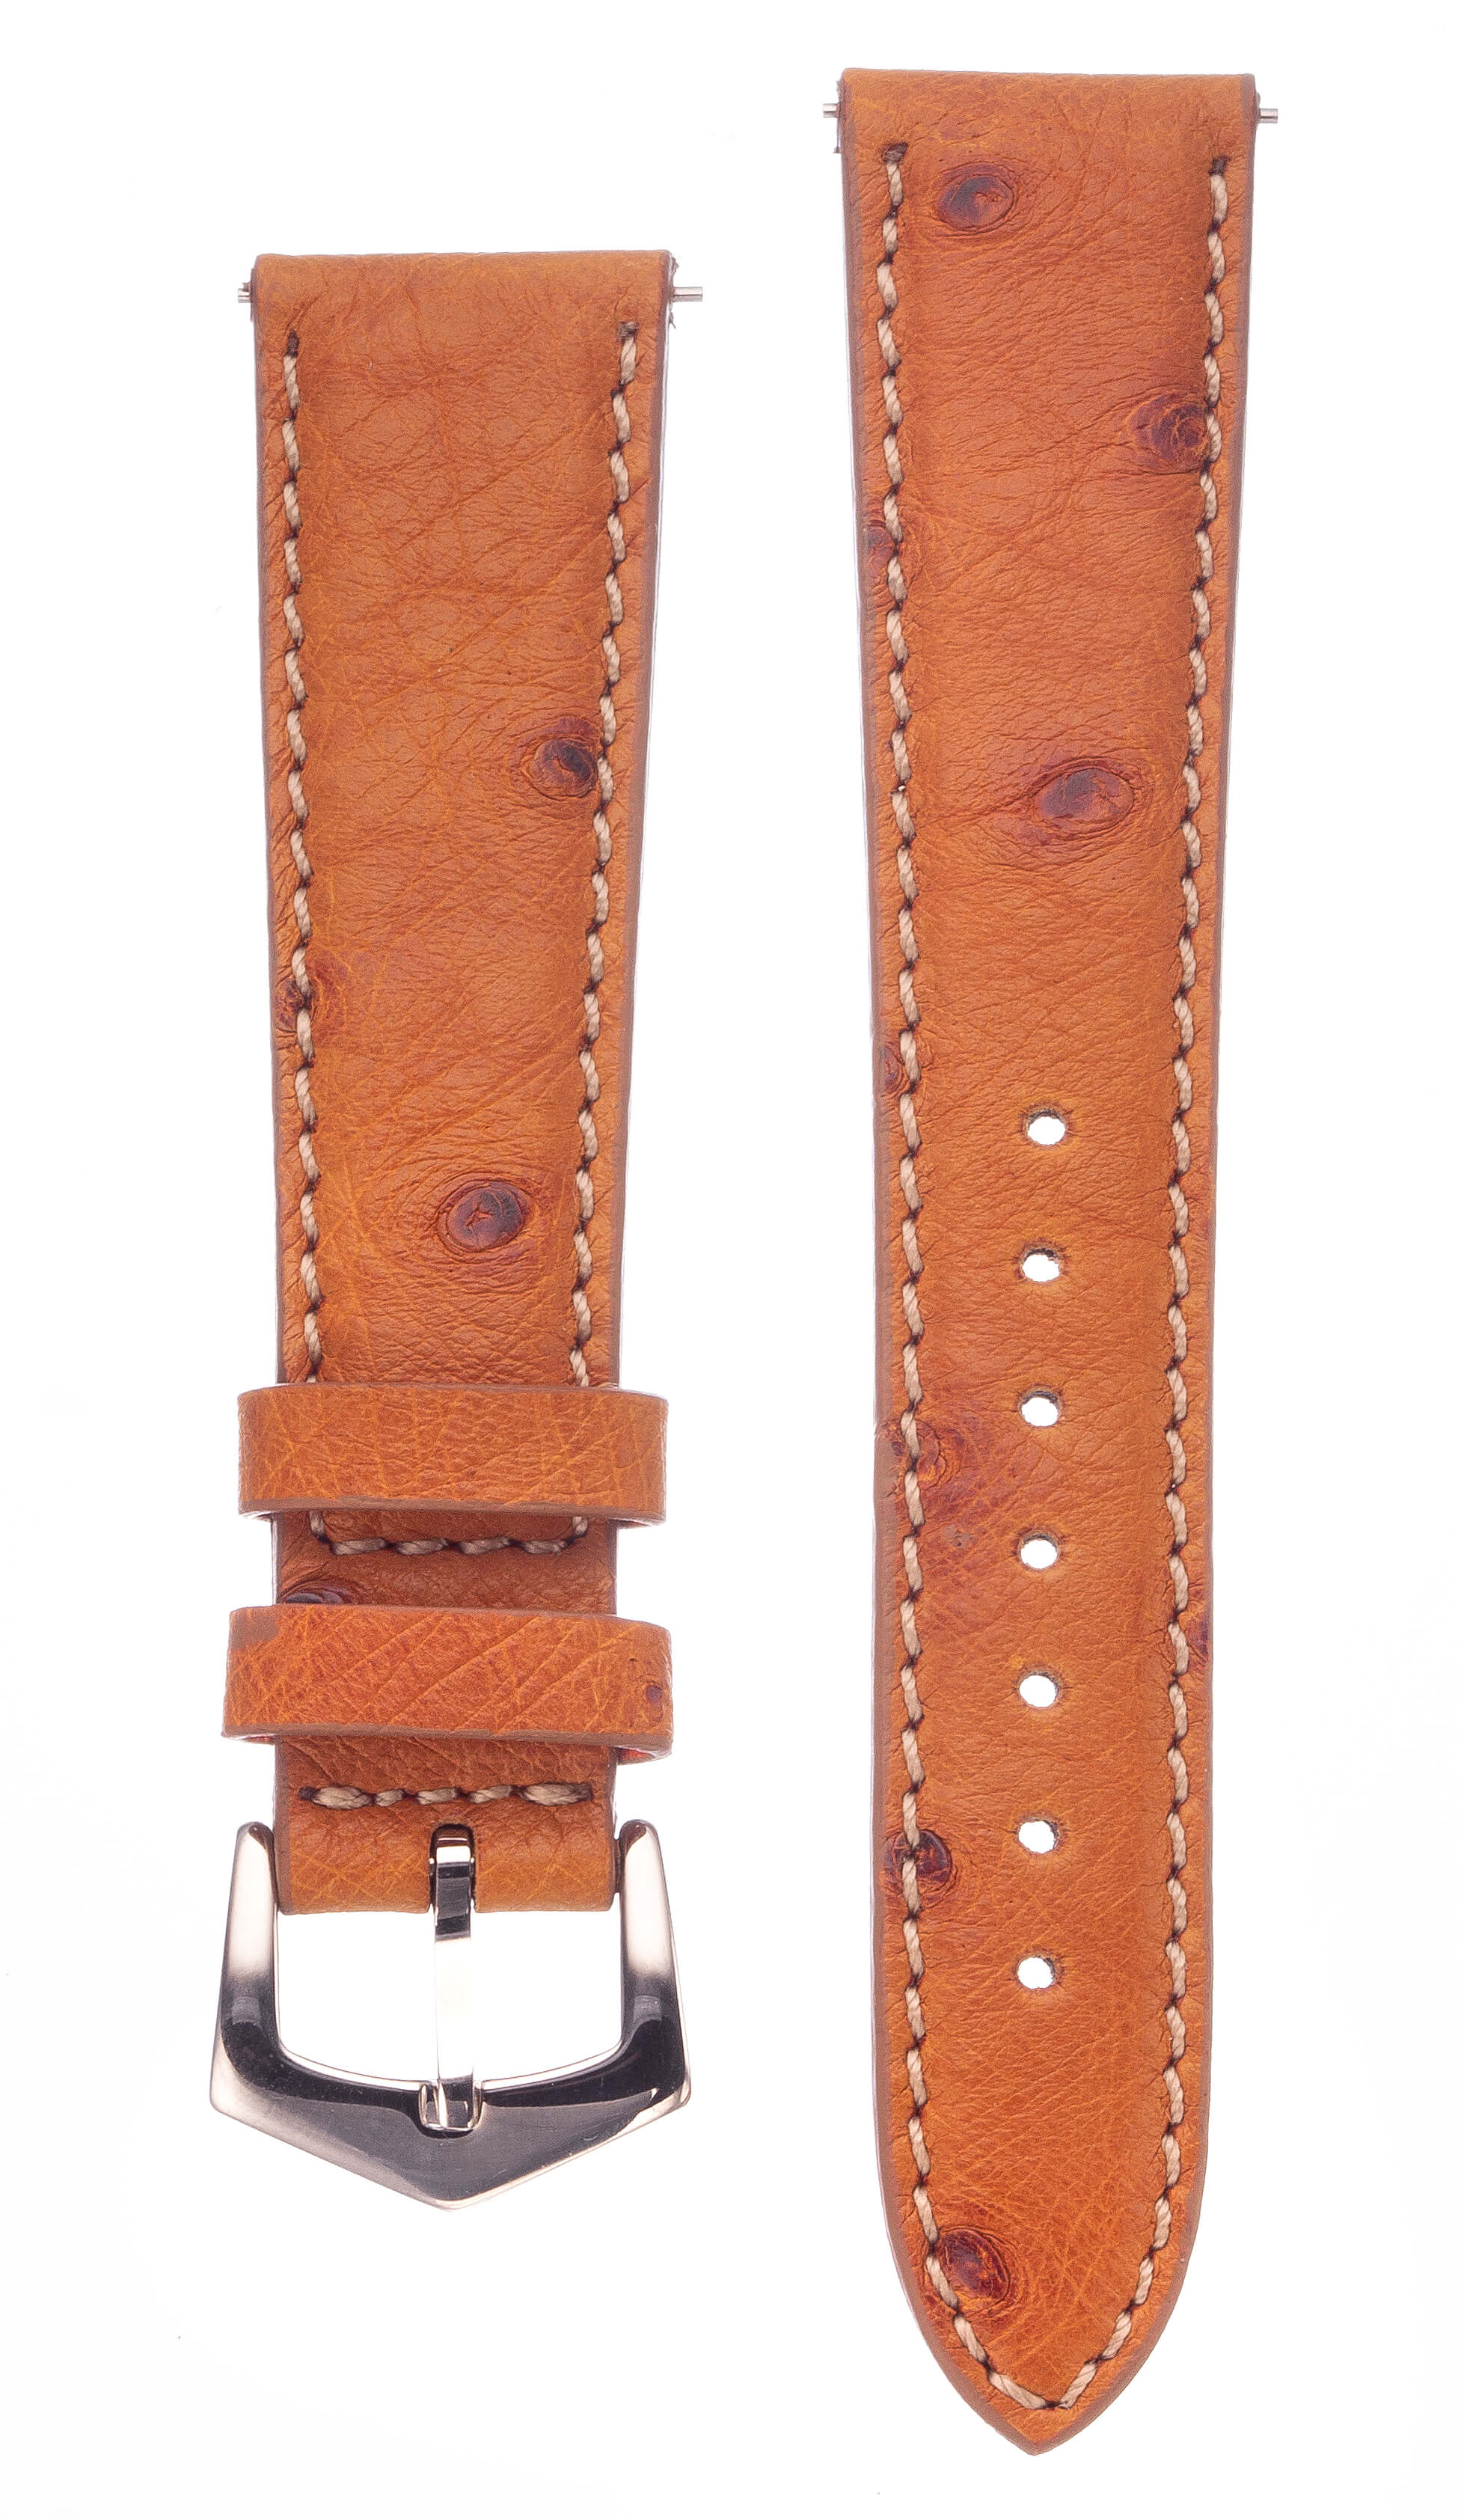 Apple Watch Leather Band ™ Cognac Ostrich Leather Straps - Milano Straps